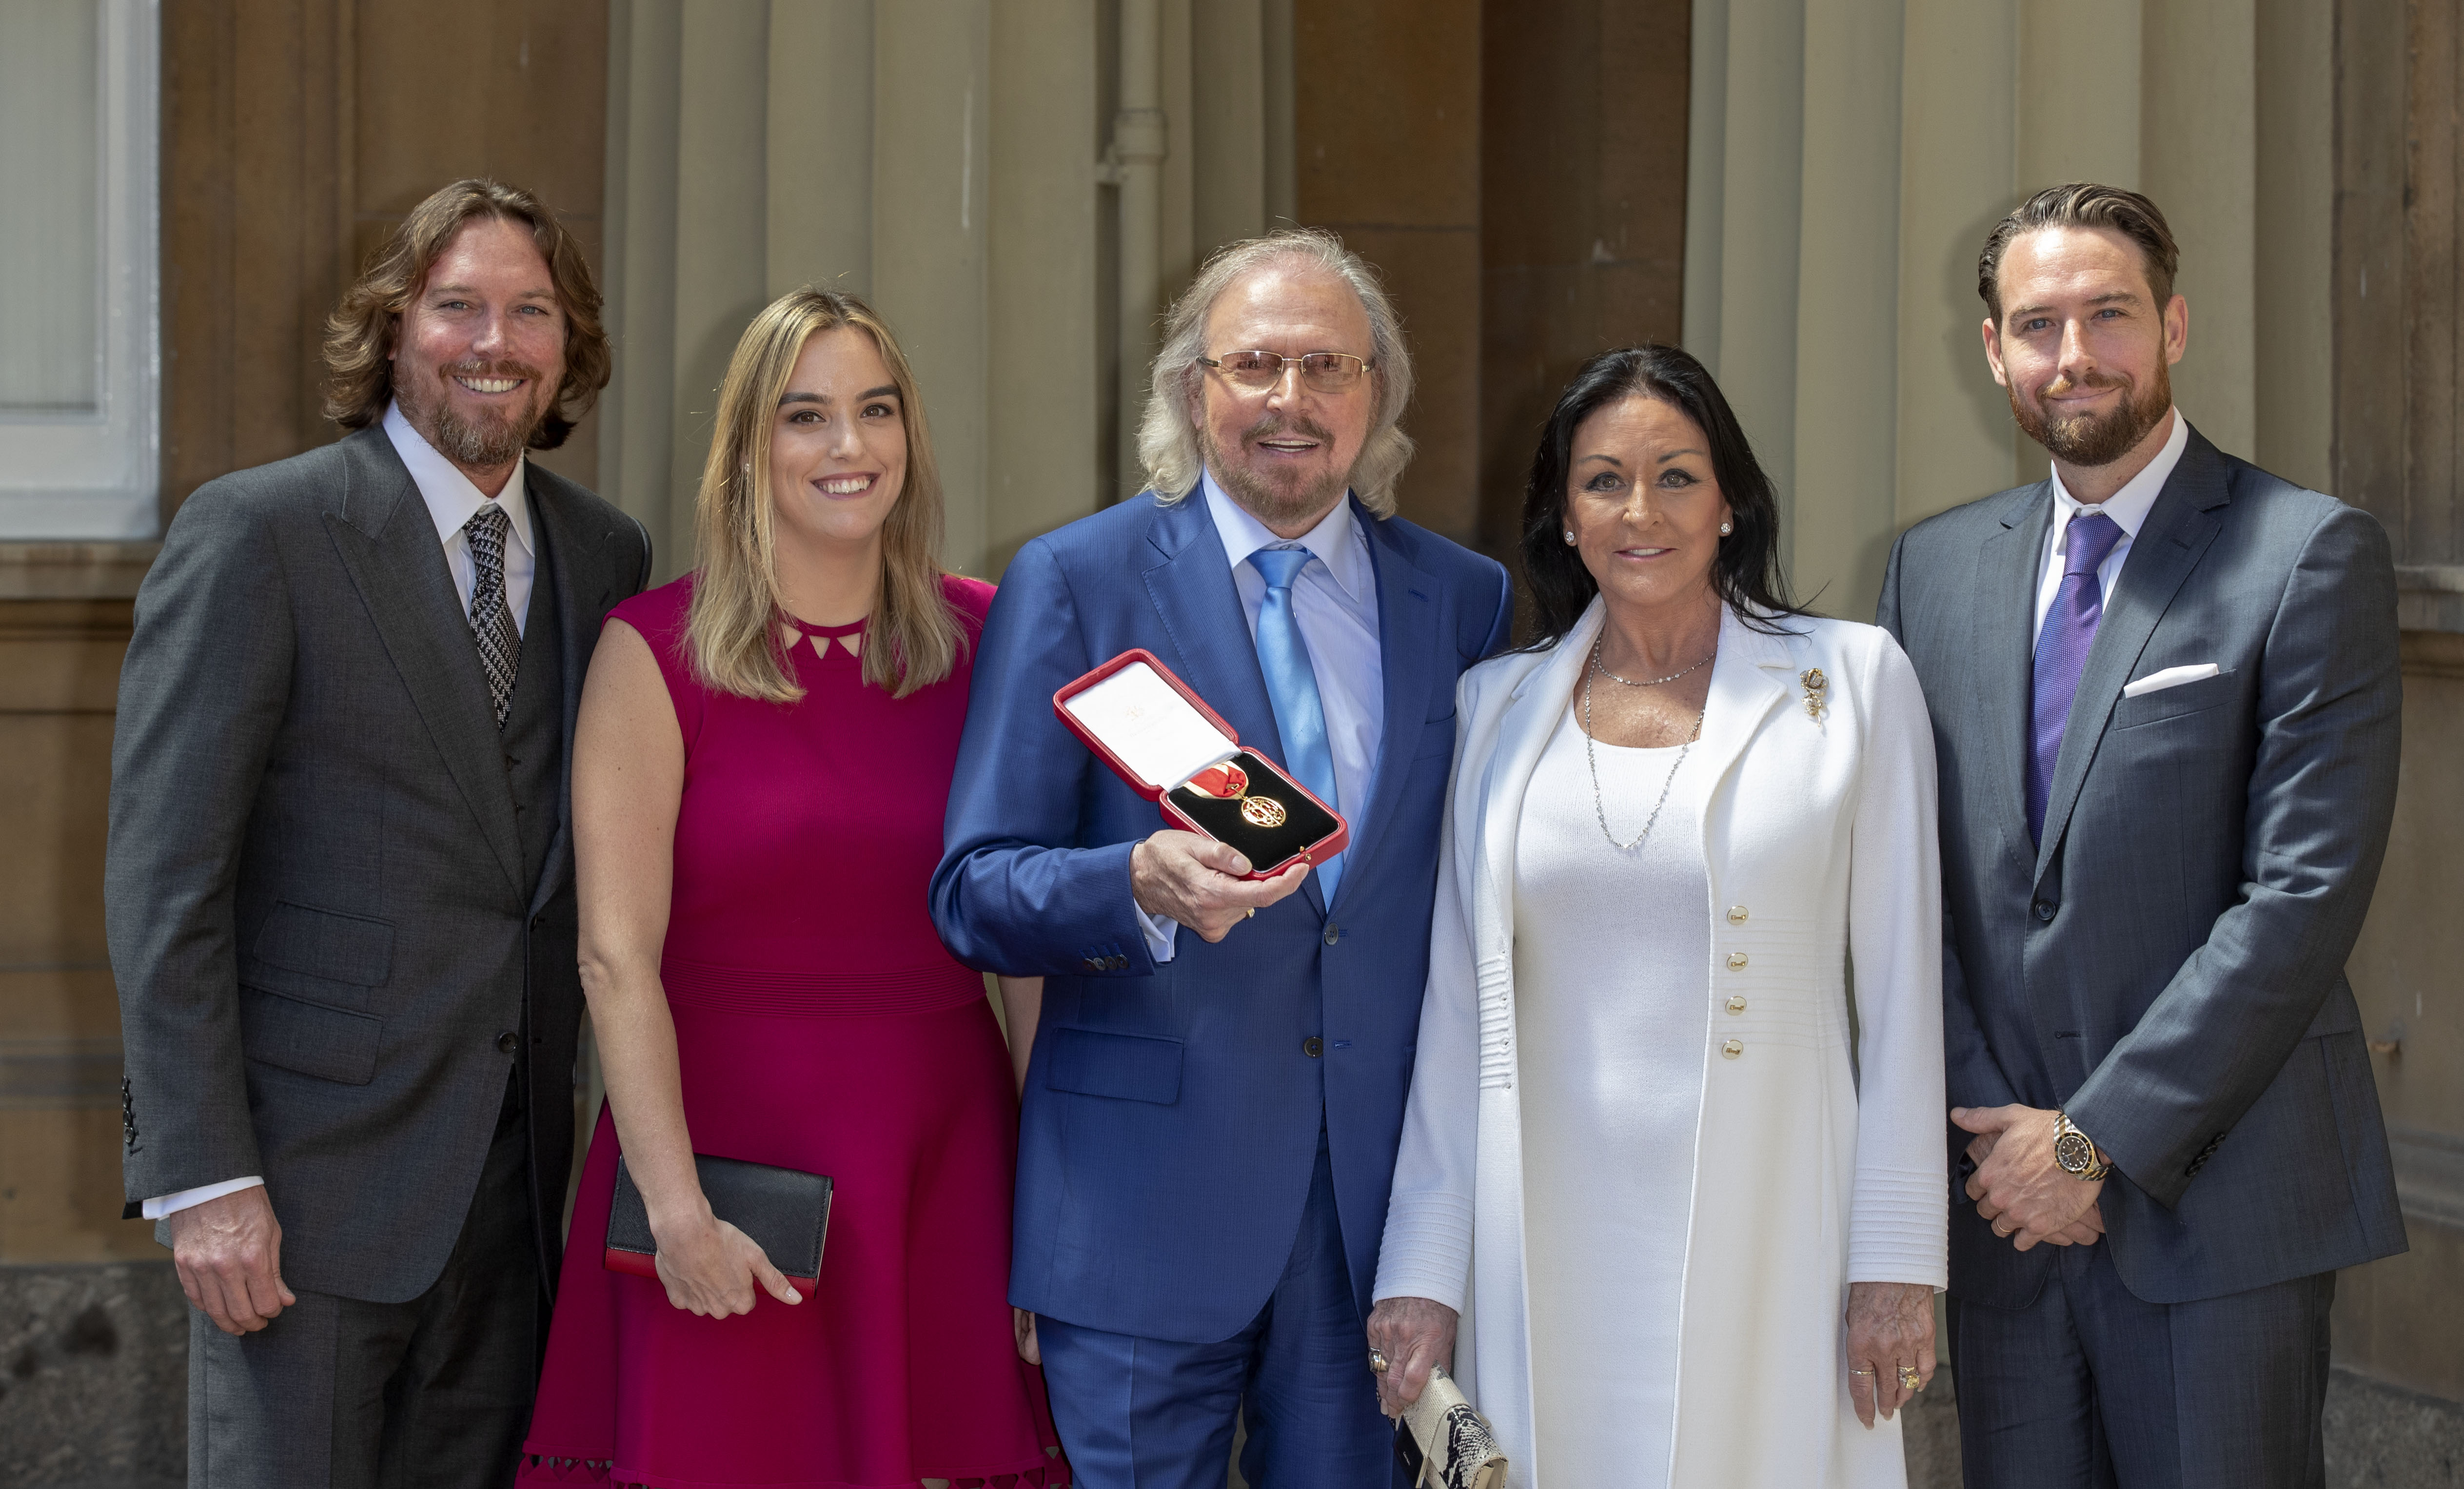 Ashley, Alexandra, and Barry Gibb with Linda Gray and Michael Gibb at Buckingham Palace in London, 2018 | Source: Getty Images